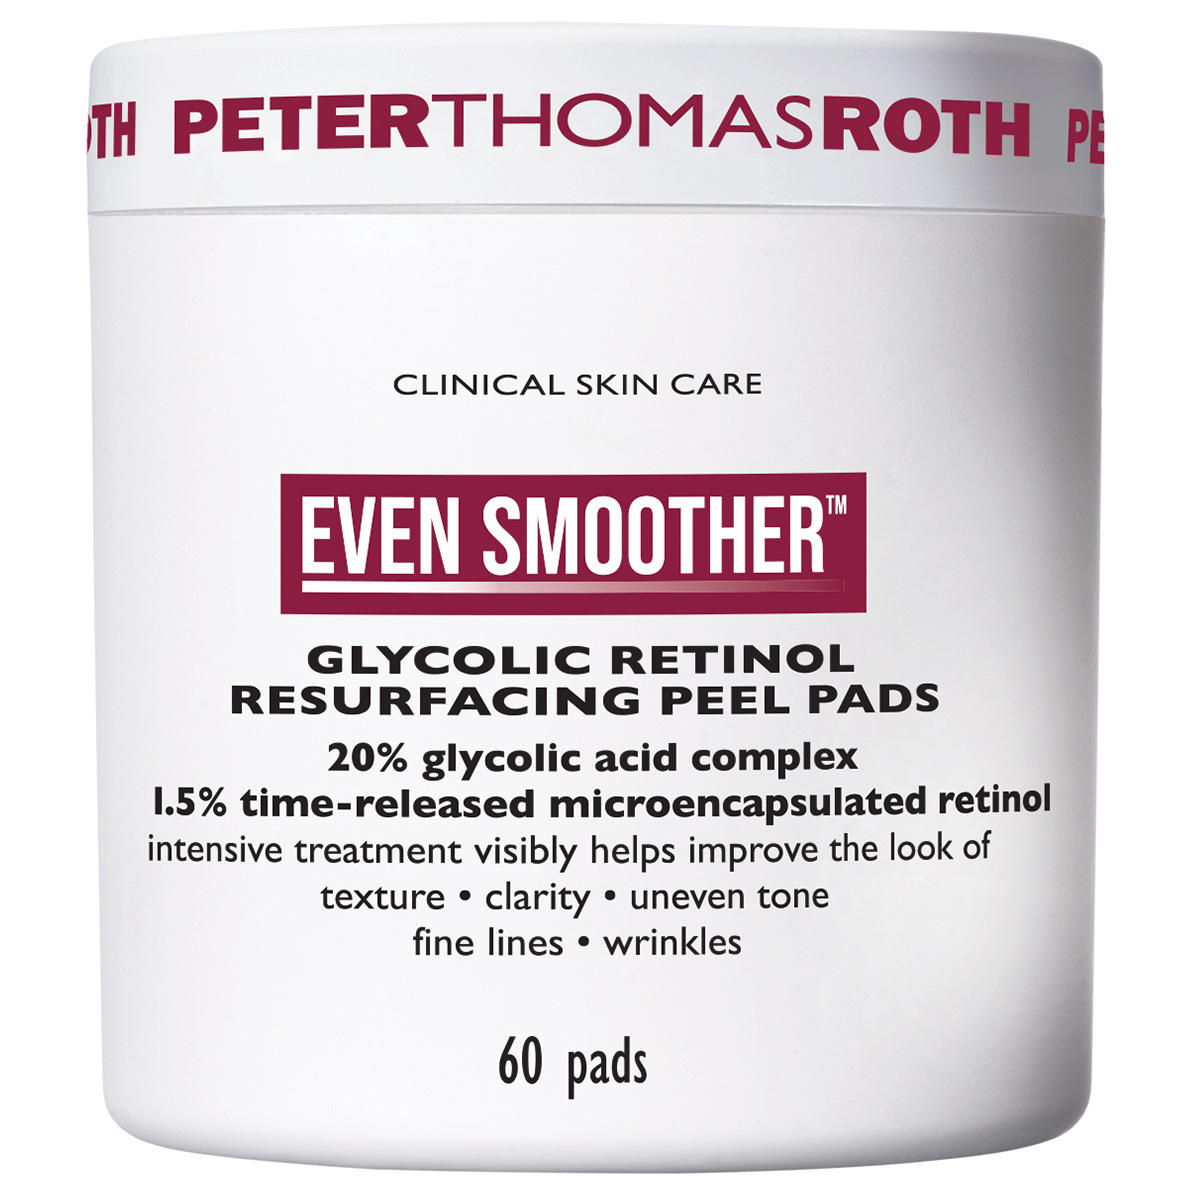 PETER THOMAS ROTH CLINICAL SKIN CARE EVEN SMOOTHER GLYCOLIC RETINOL RESURFACING PEEL PADS Pro Packung 60 Stück - 1